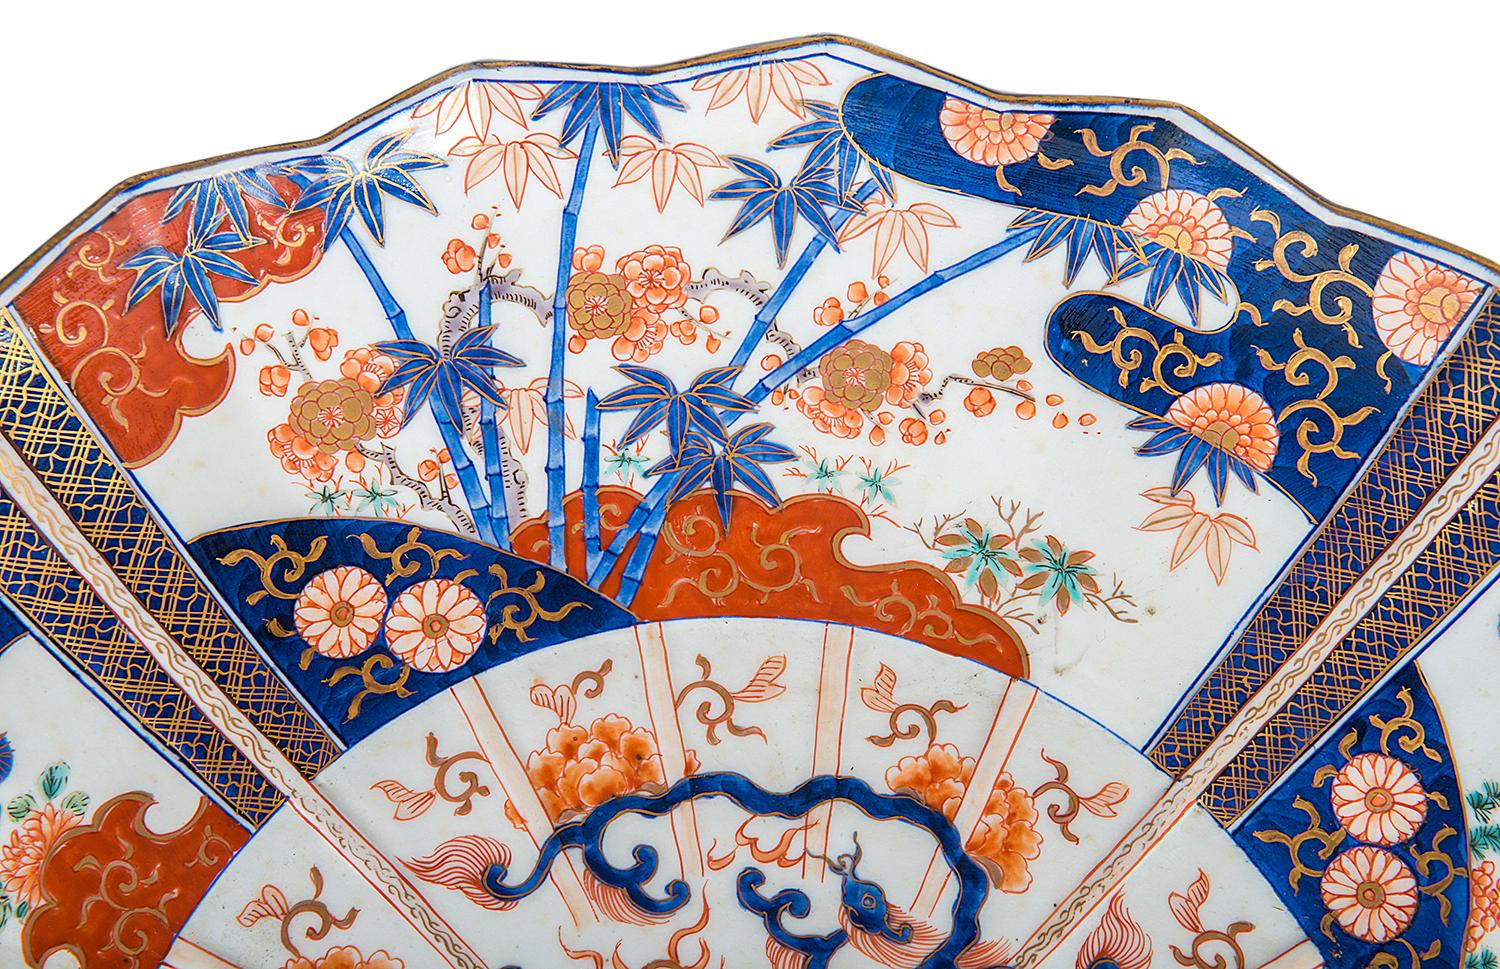 A very good quality late 19th century Japanese Imari charger, having four-fan shaped segmented panels each with bamboo or blossom trees, motifs and floral decoration.